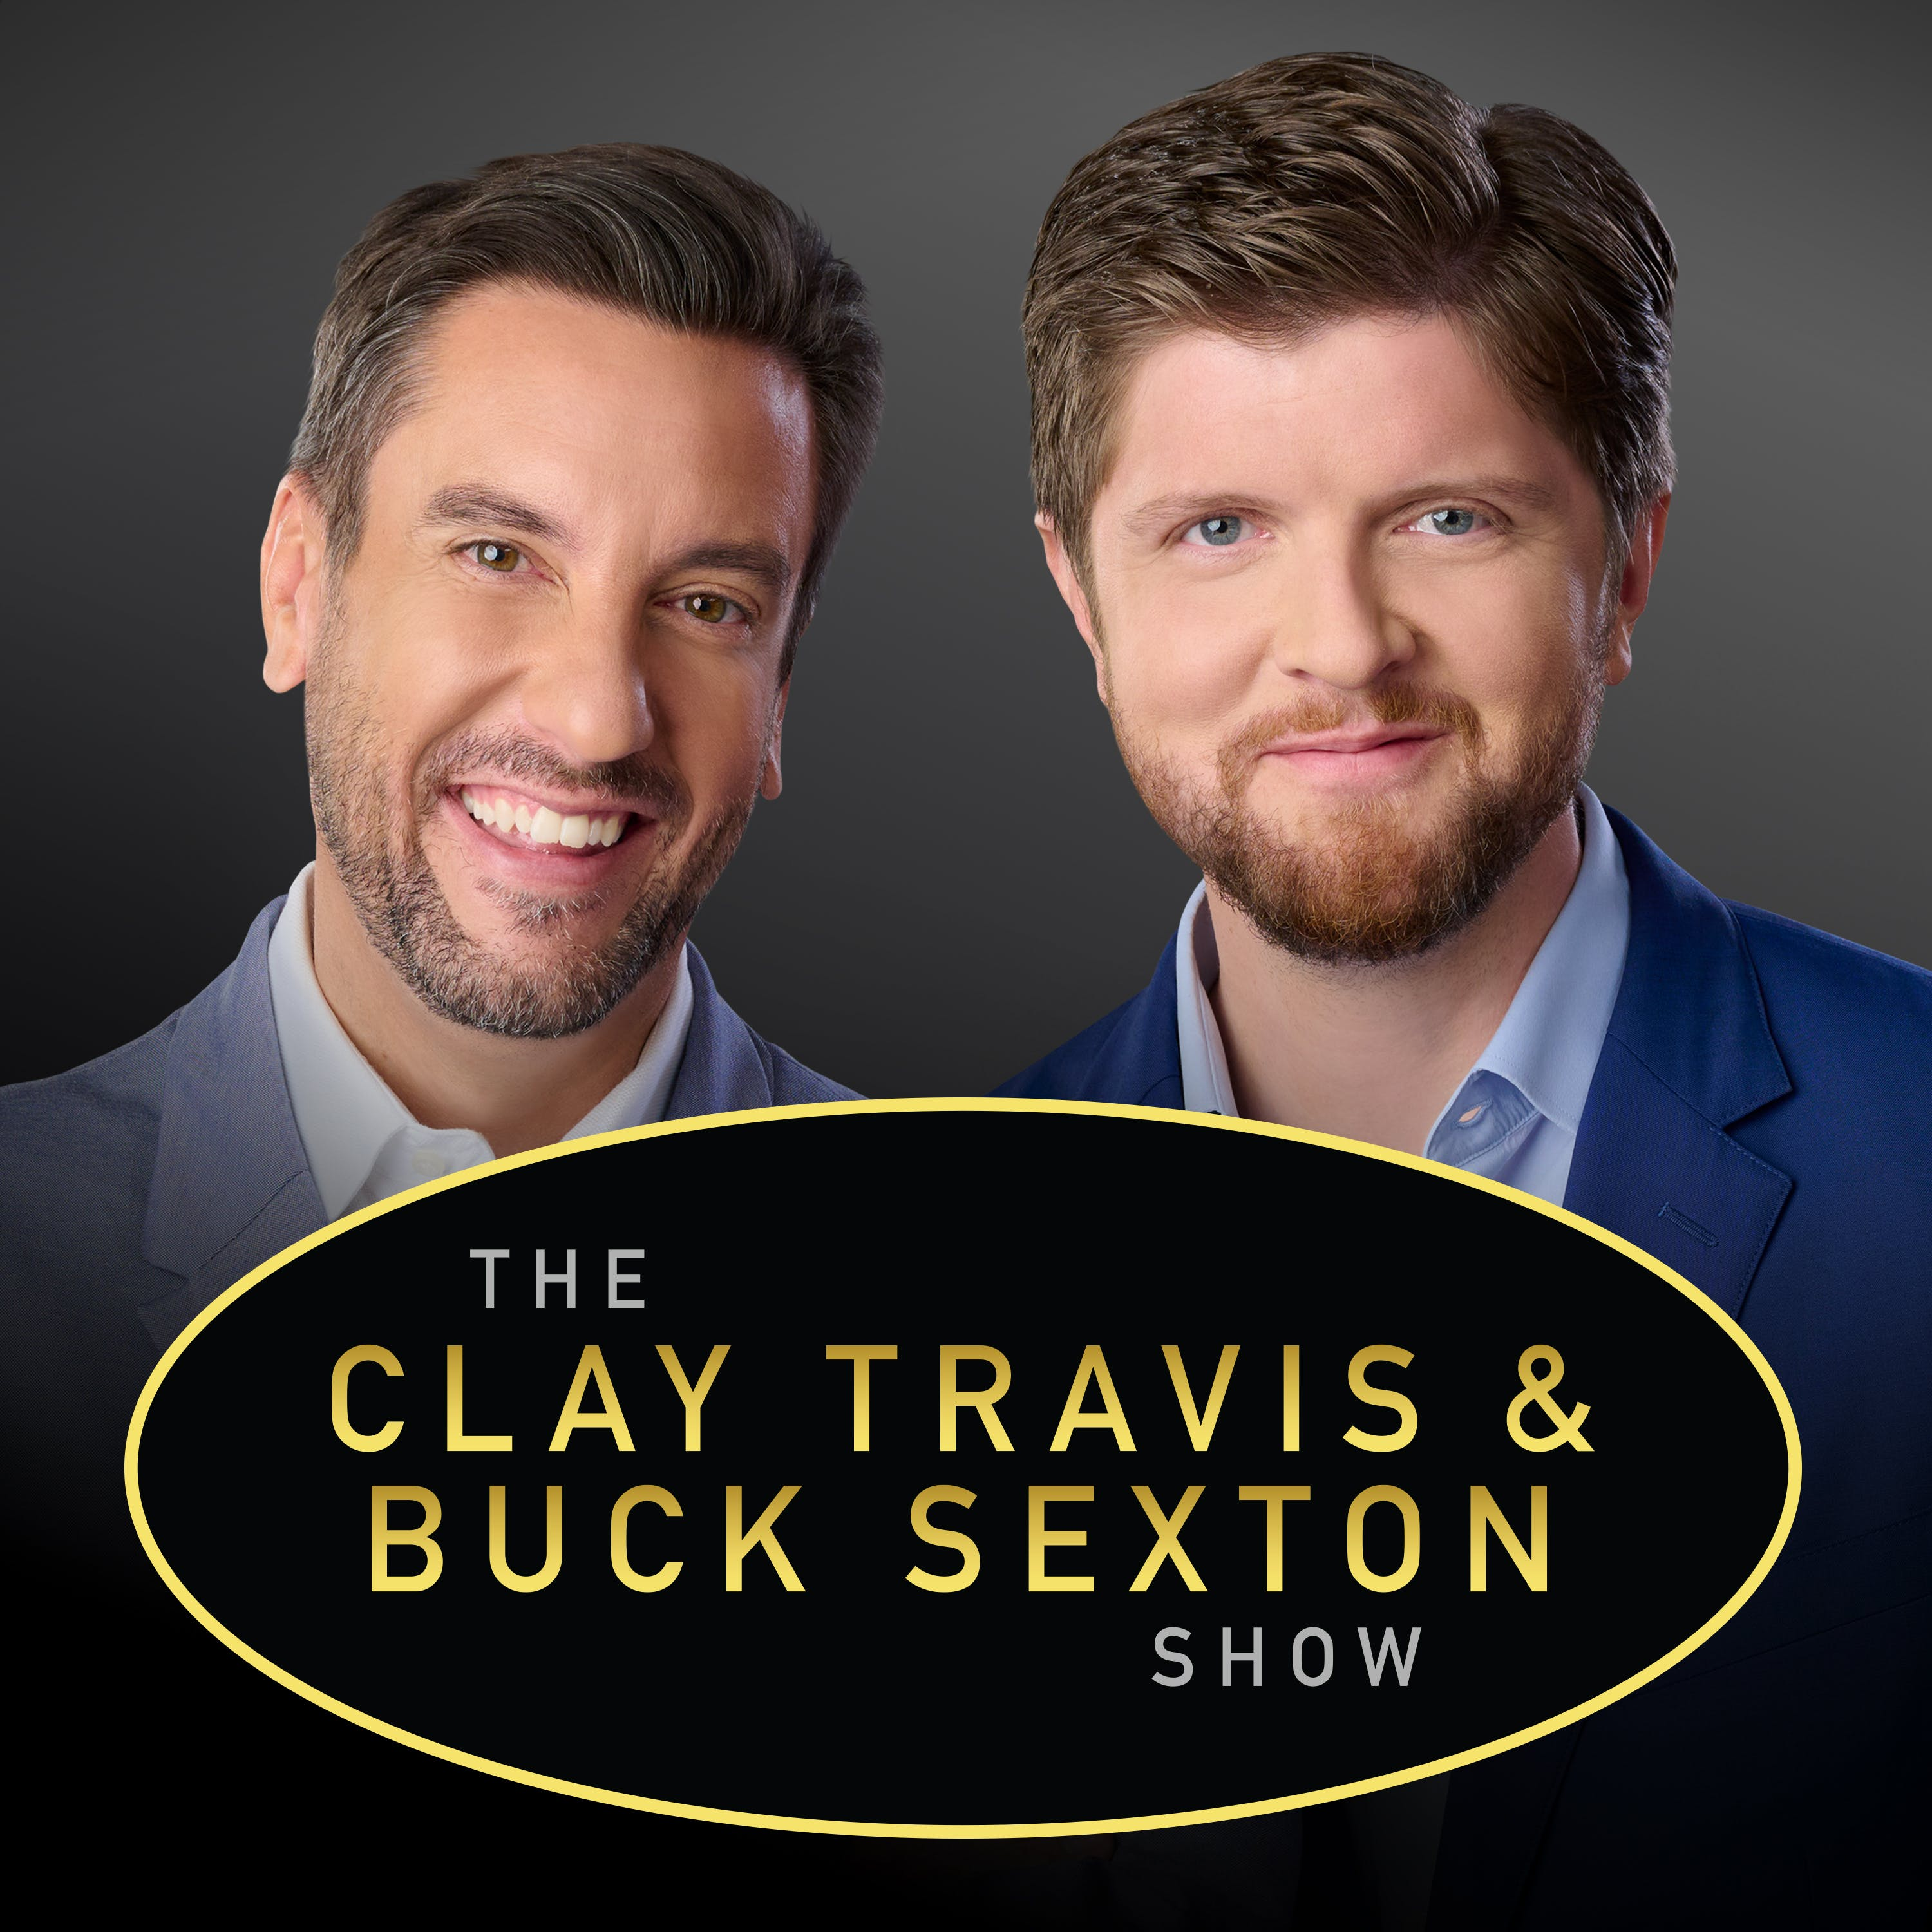 The Clay Travis and Buck Sexton Show Podcast